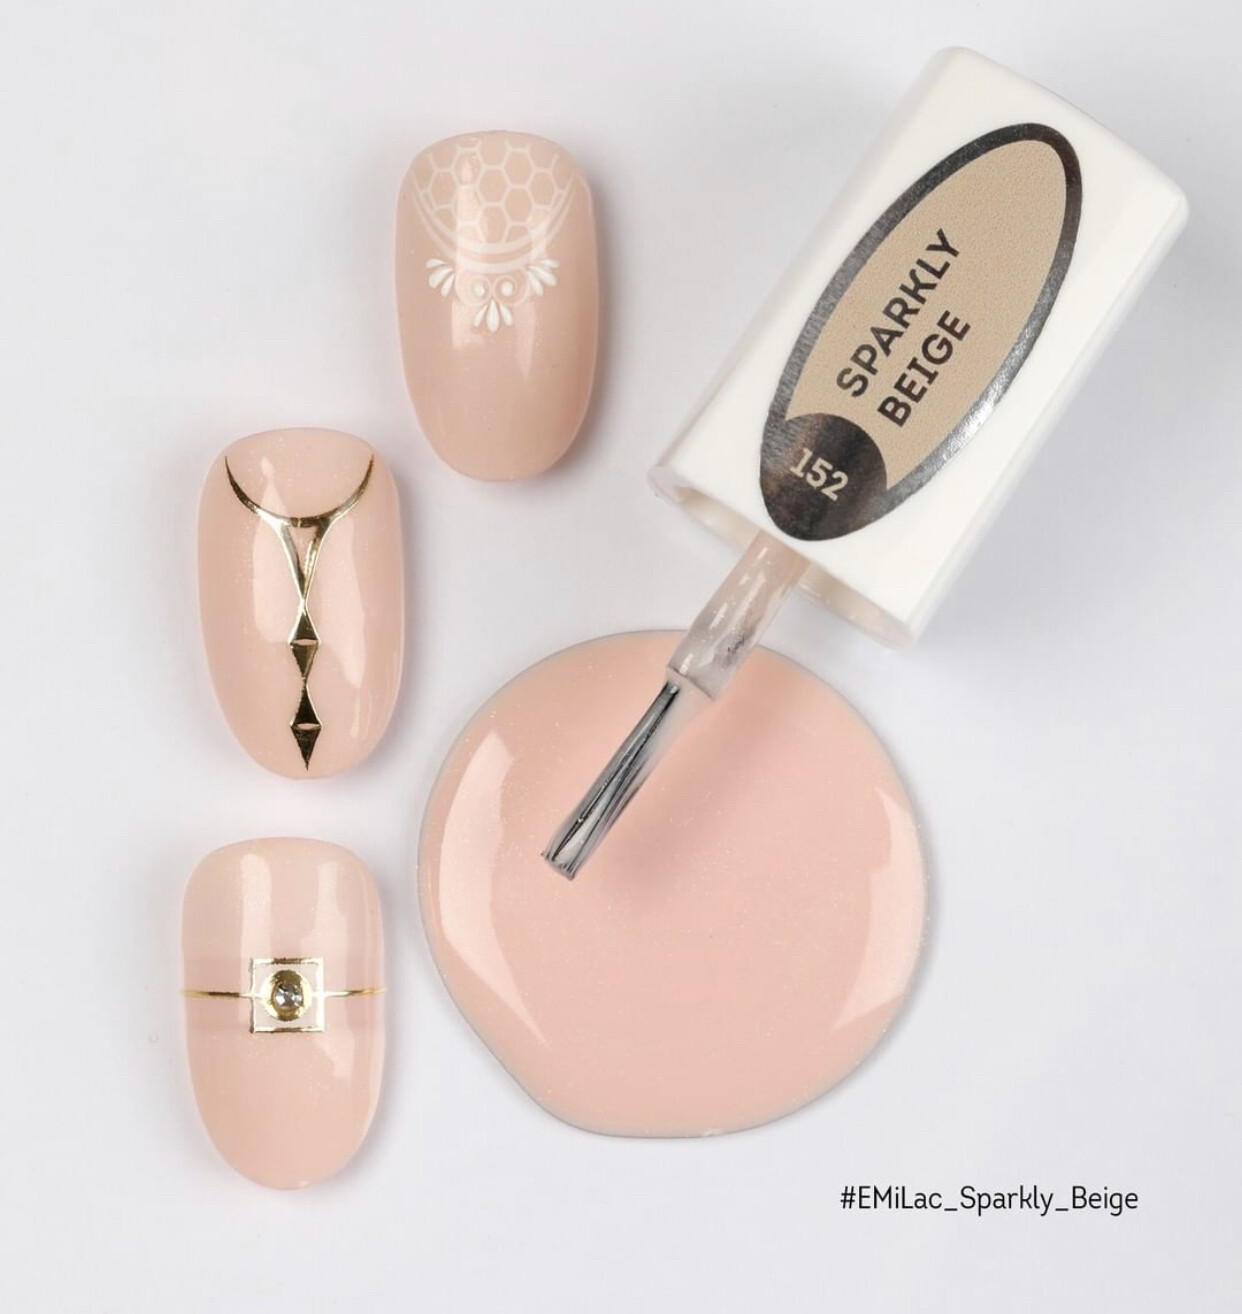 E.MiLac #152 Sparkly Beige — soft peach-colored shade with a fine shimmer